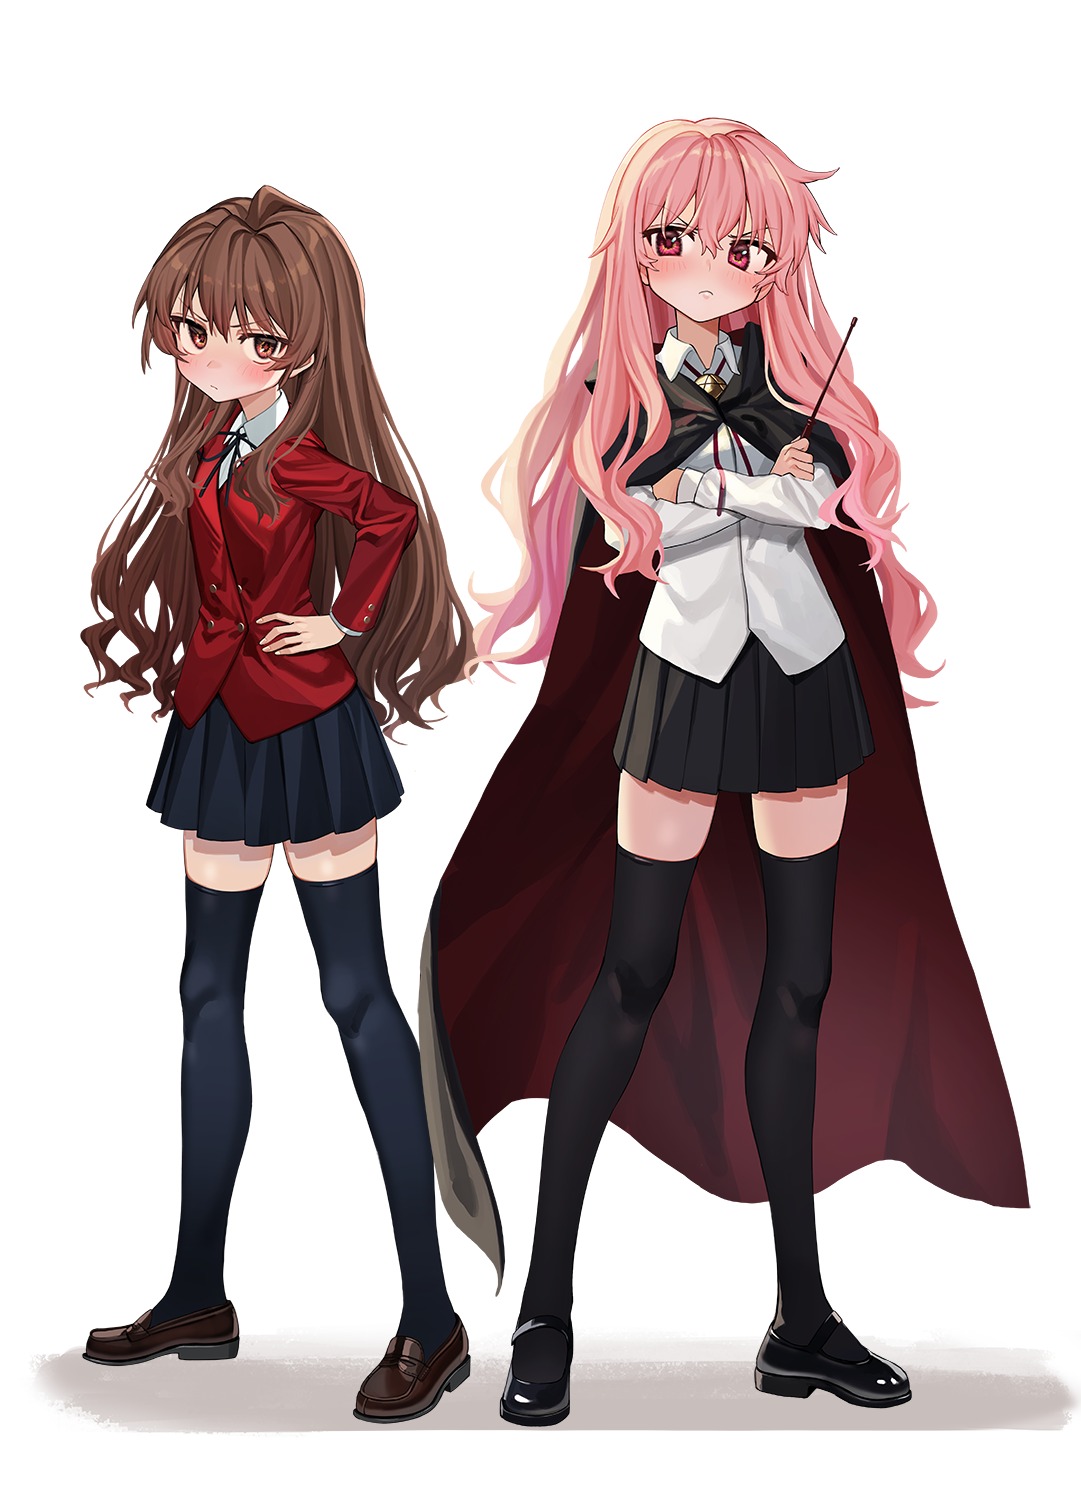 File:Darling in the Franxx and atre crossover advertisement.jpg - Wikipedia